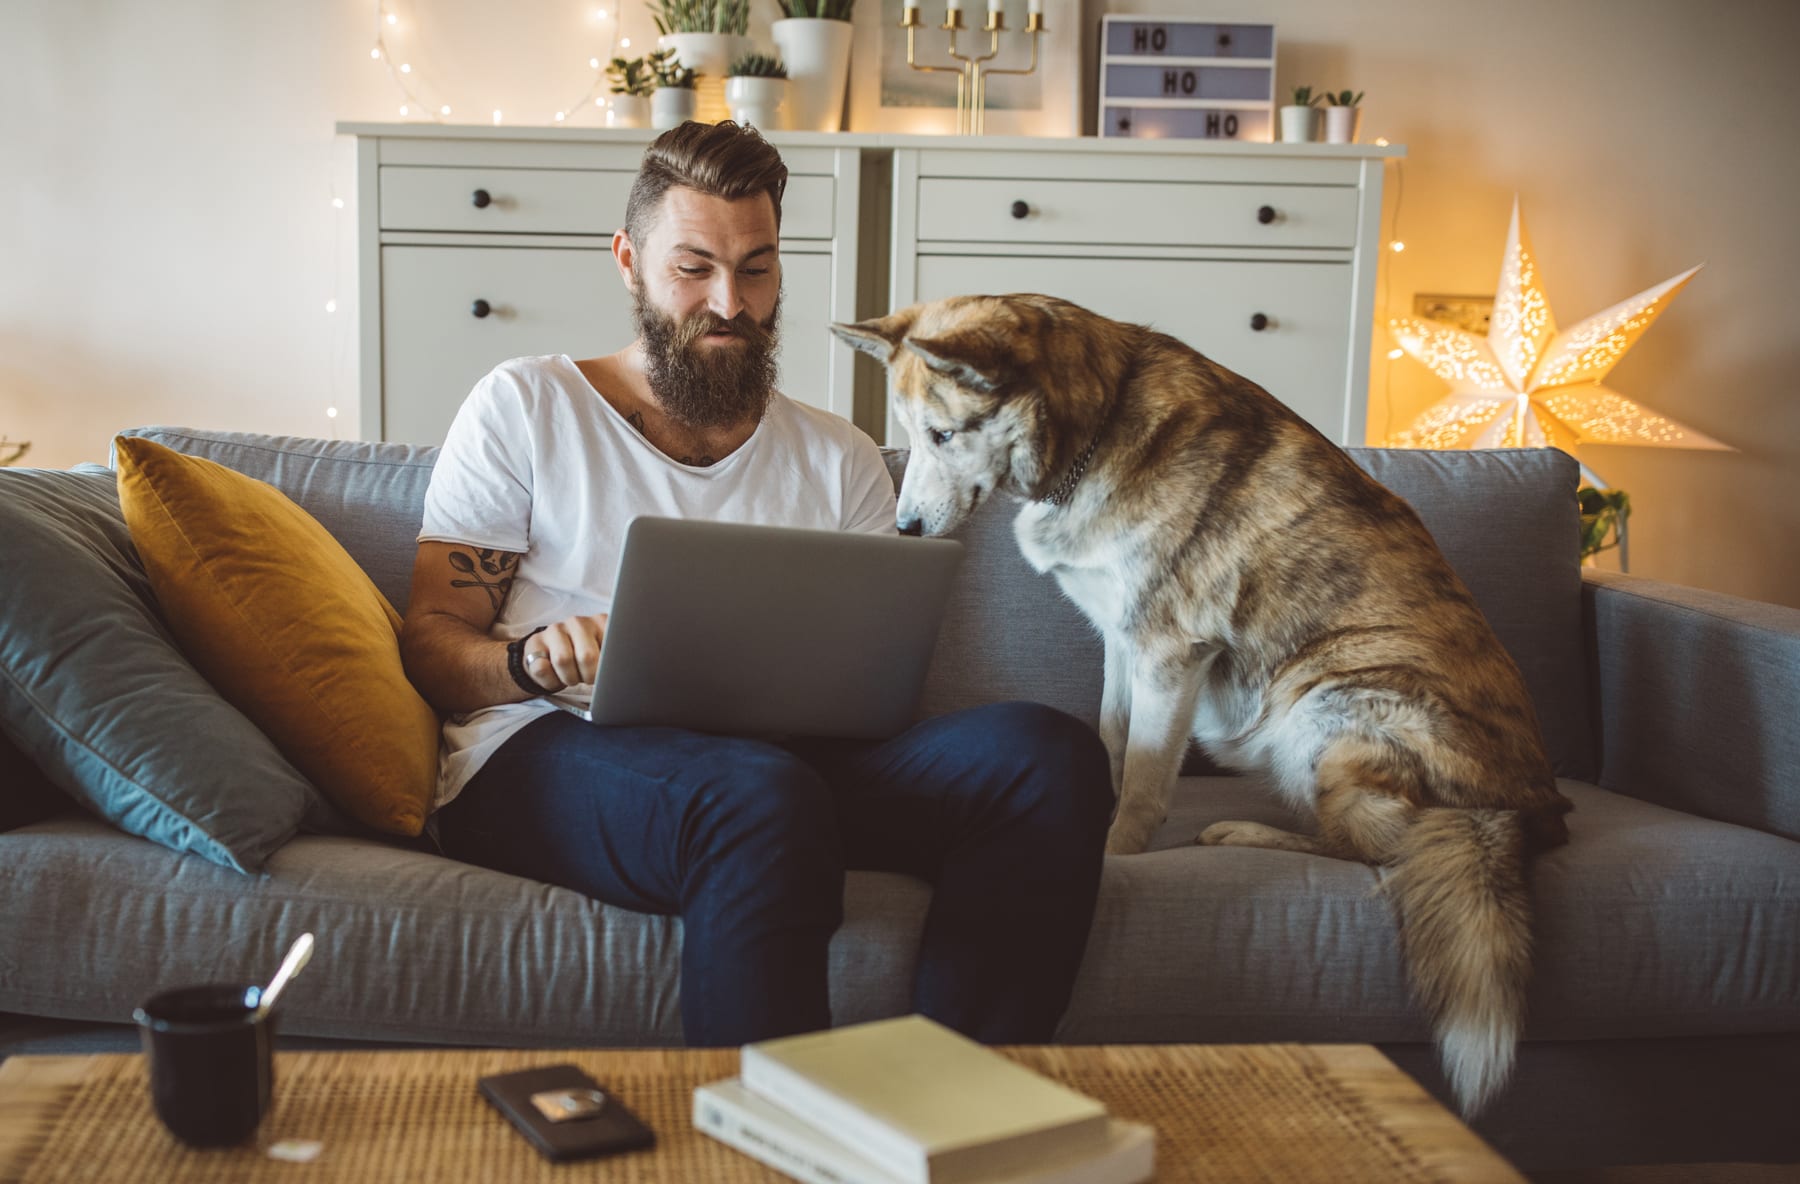 Man sits on couch and shops online with his dog.